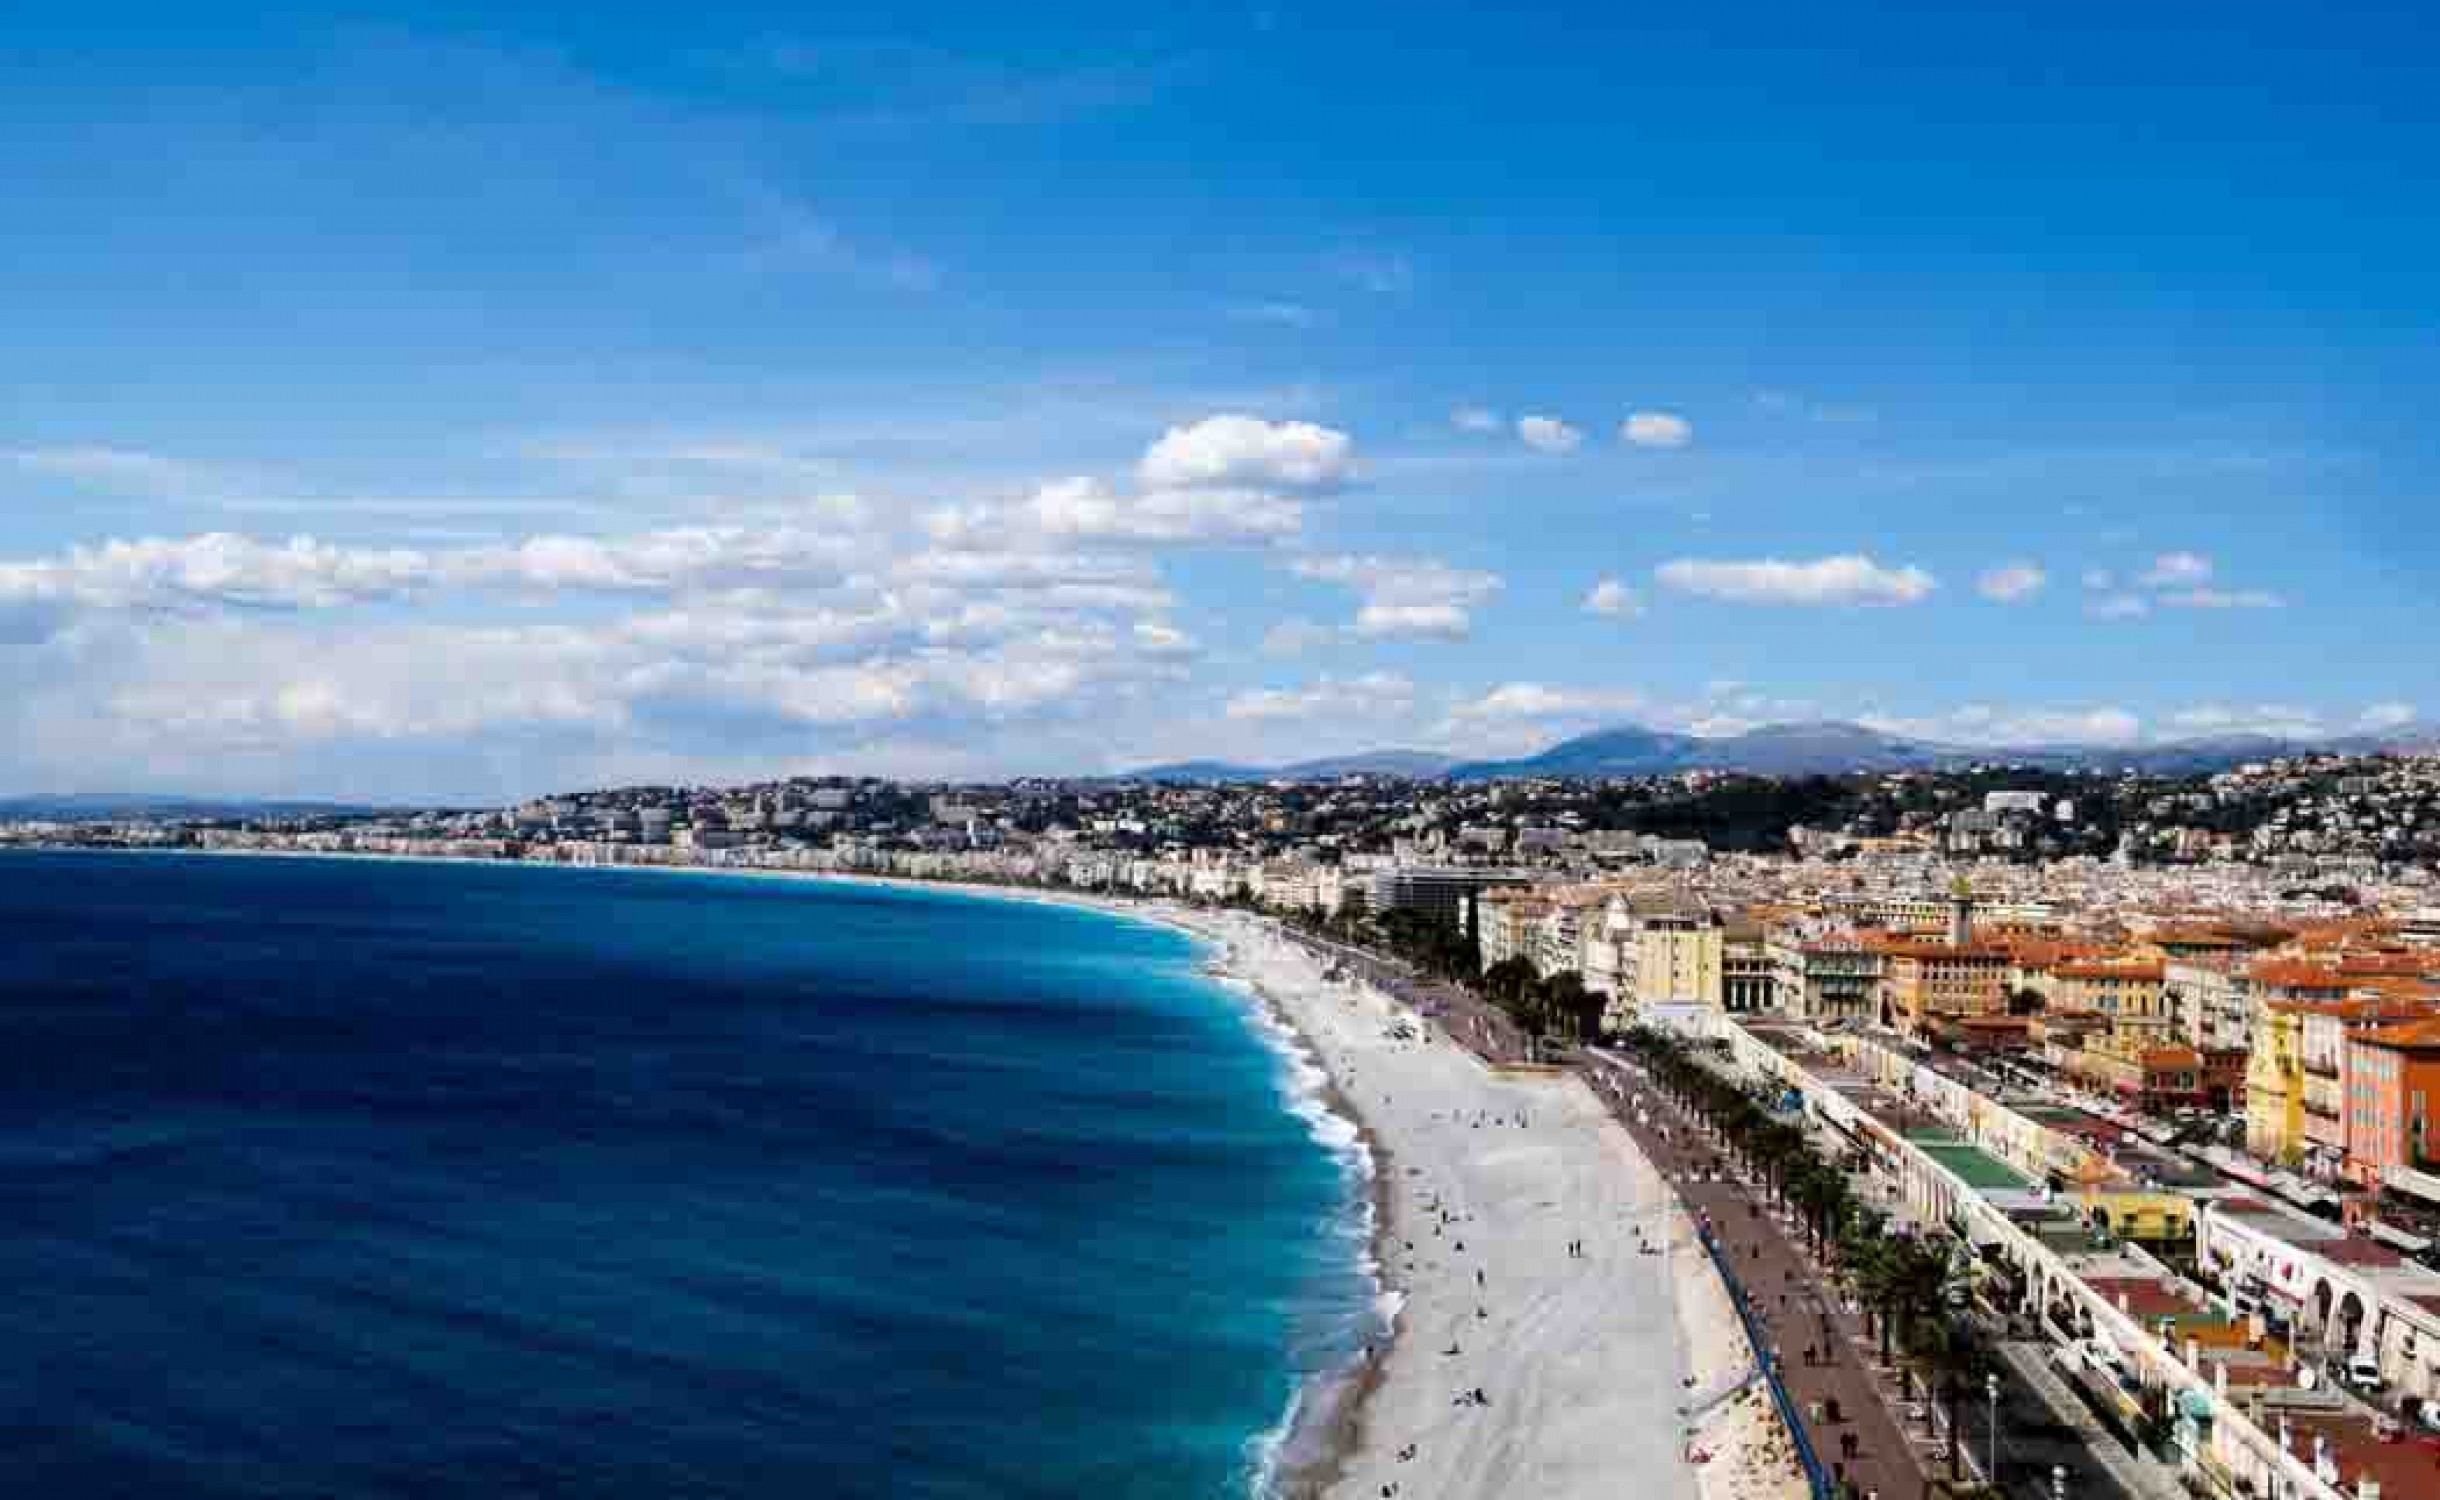 Luxury sightseeing tour on the French Riviera